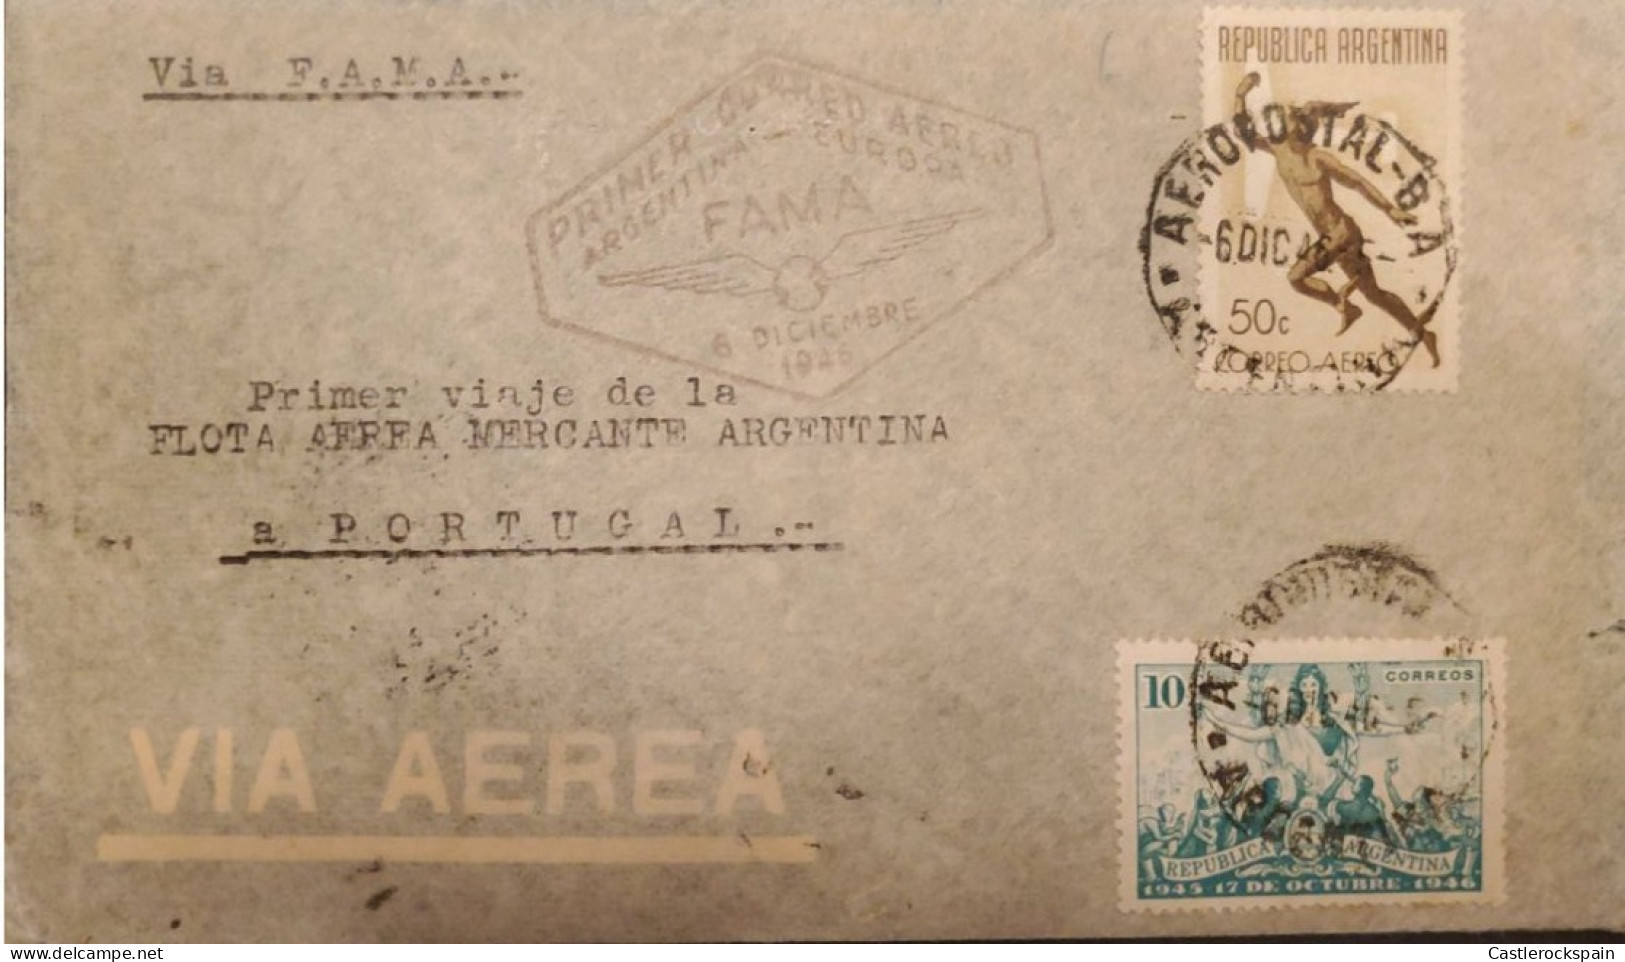 MI) 1946, ARGENTINA, VIA F.A.M.A, AEROPOSTAL, AIR MAIL, FROM BUENOS AIRES TO PORTUGAL, LIBERTY REVOLUTION SALUTING THE P - Oblitérés